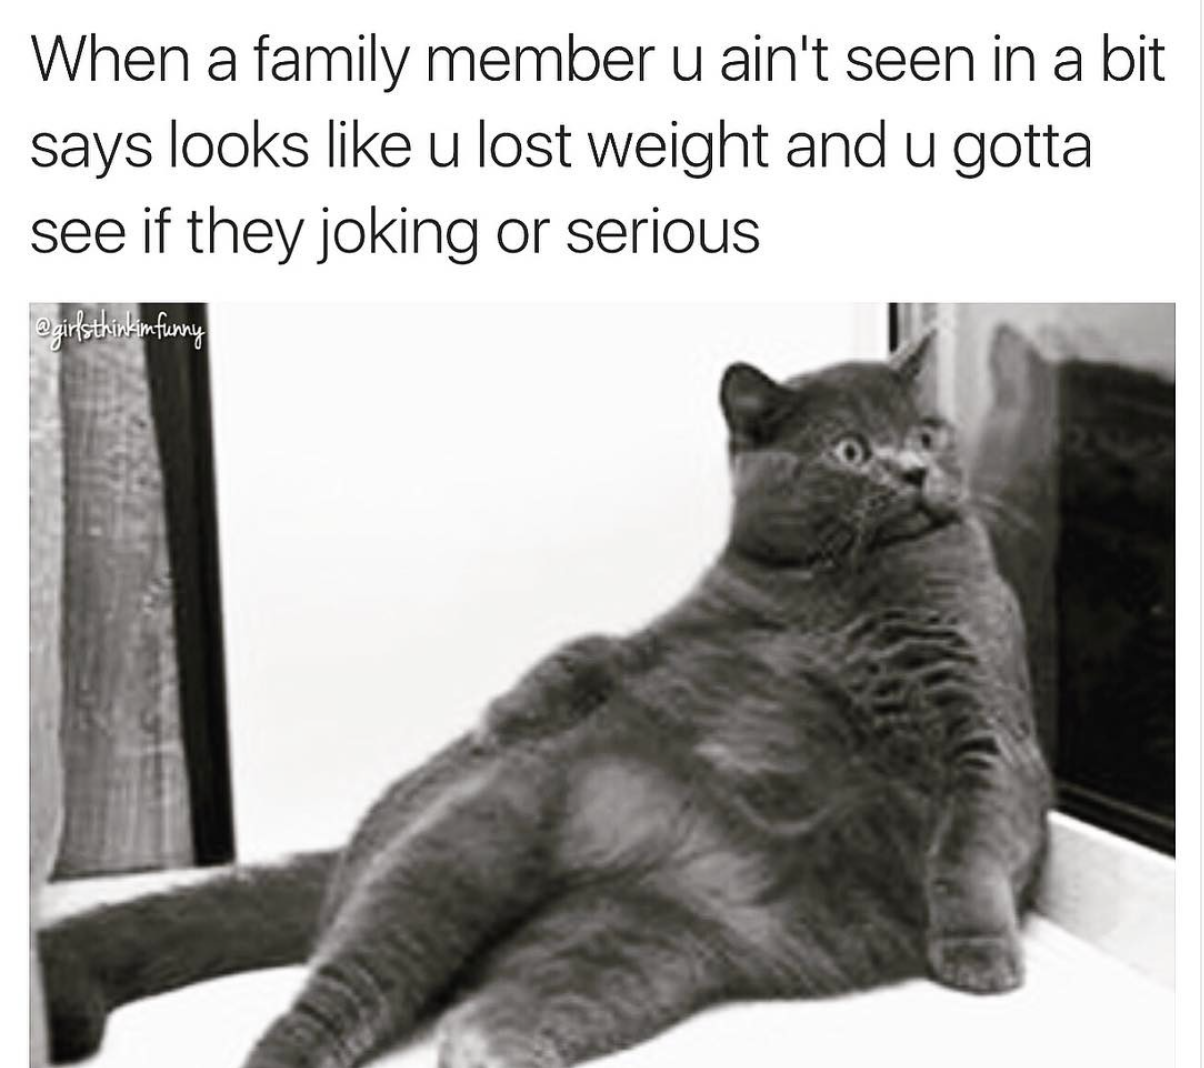 british blue cat fat - When a family member u ain't seen in a bit says looks u lost weight and u gotta see if they joking or serious girlsthirkumfurry